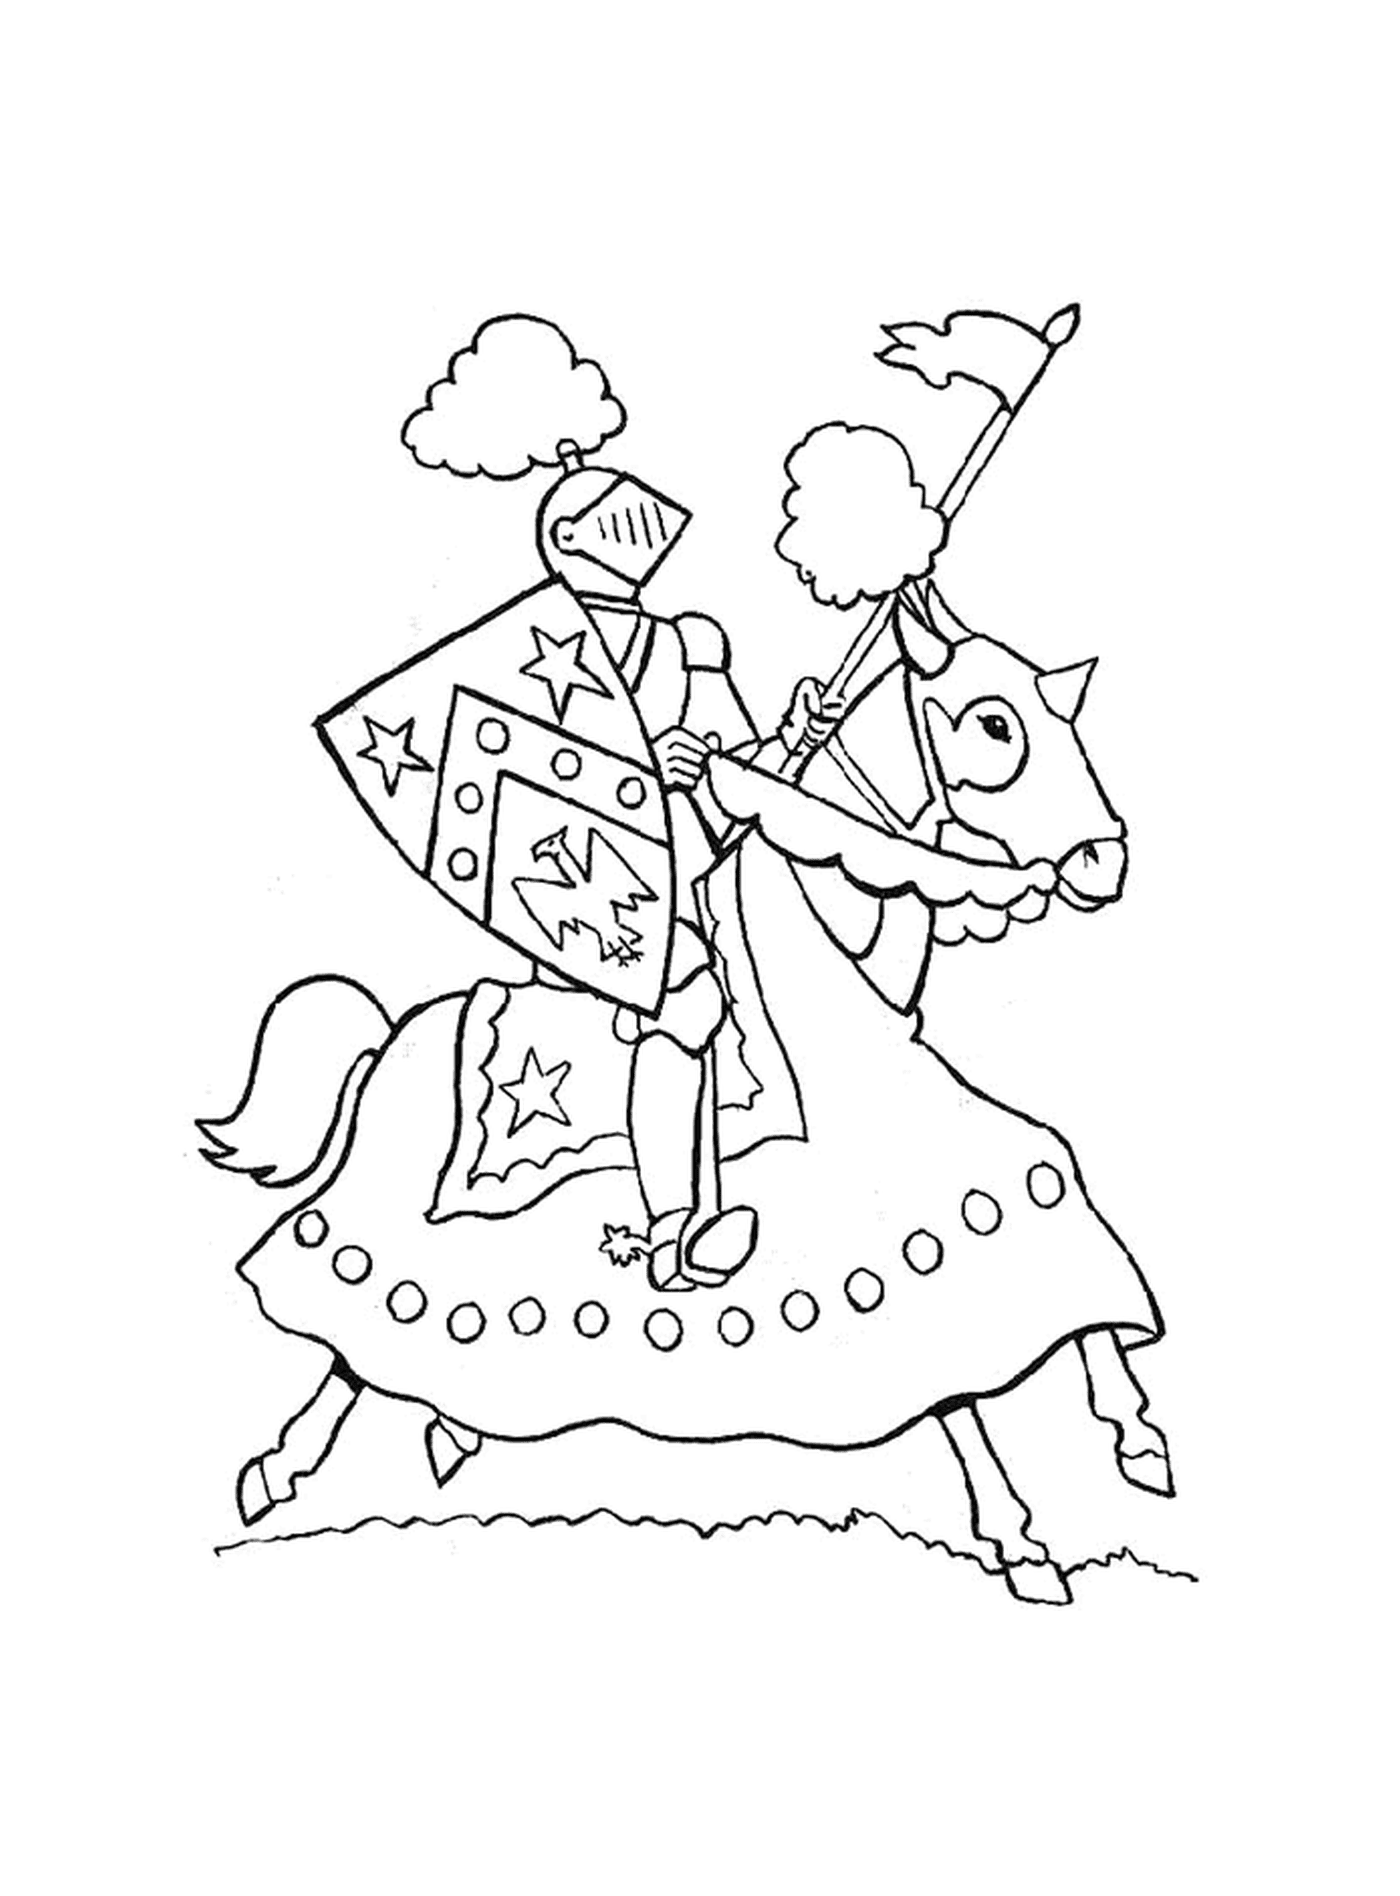  A knight riding his horse 